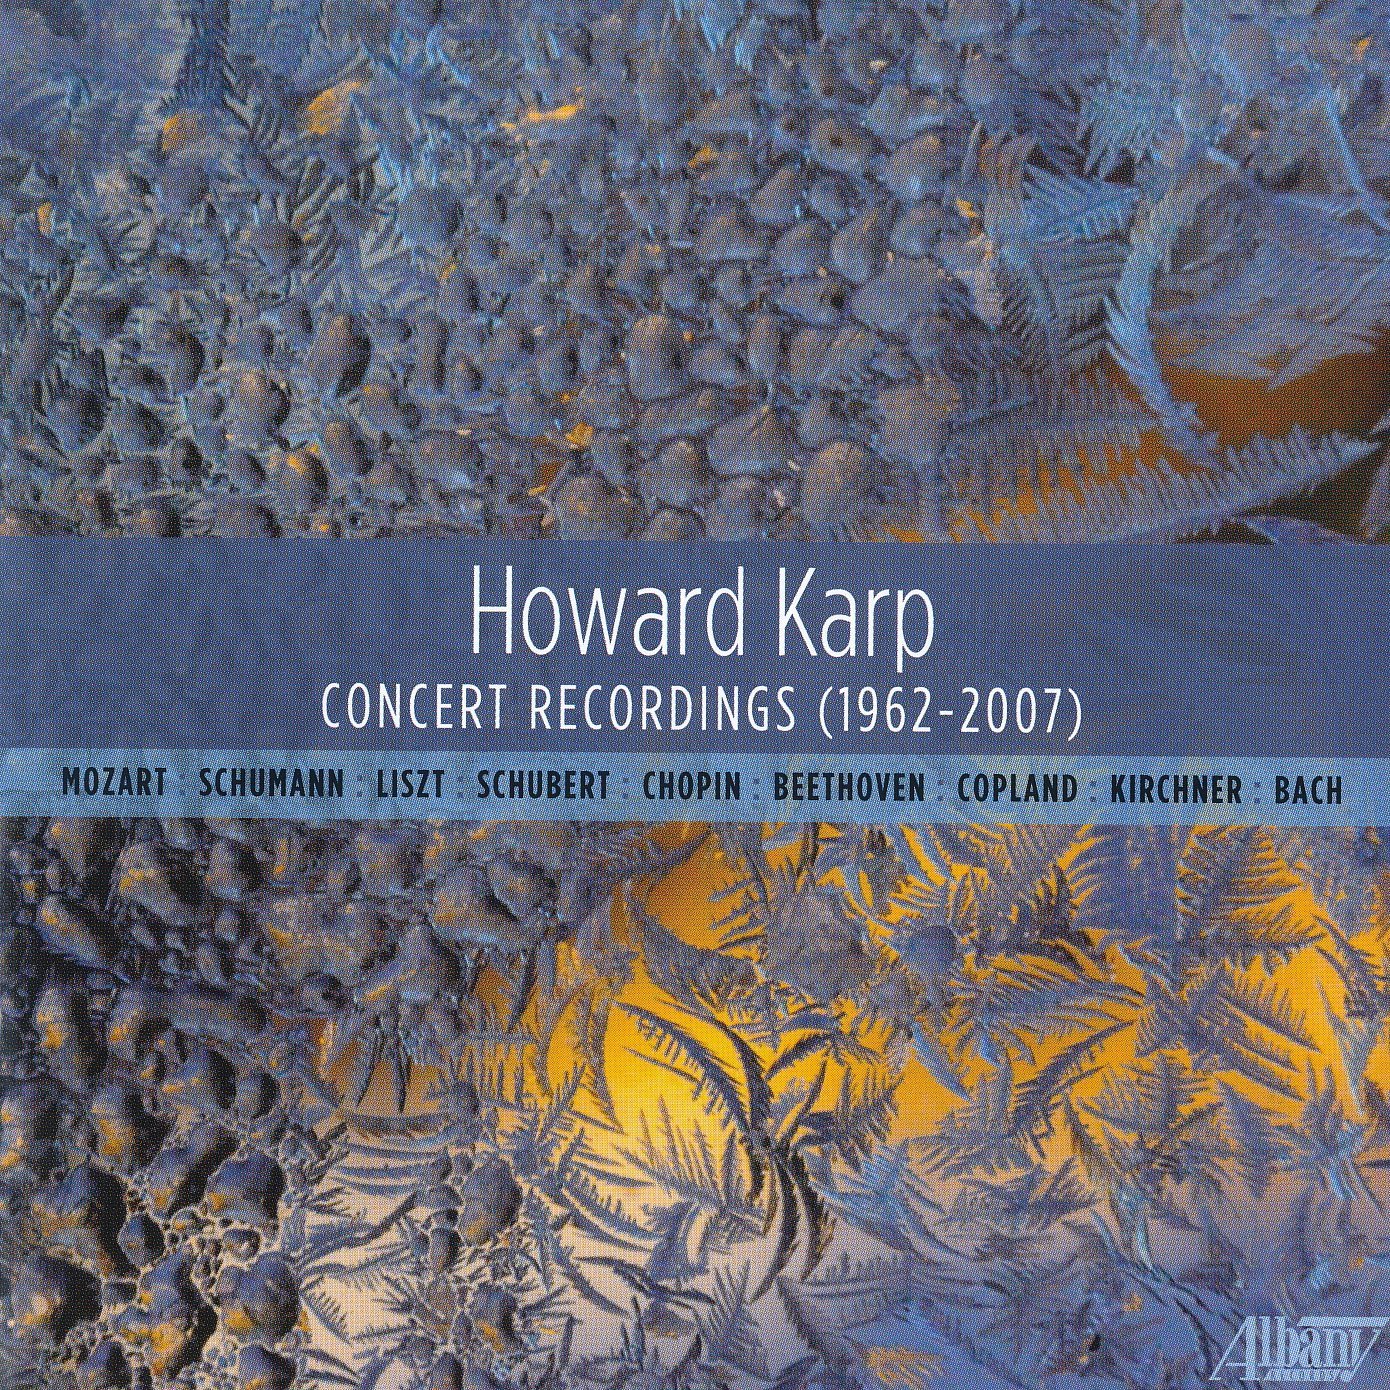 Karp, Copland and Kirchner (and Bach)